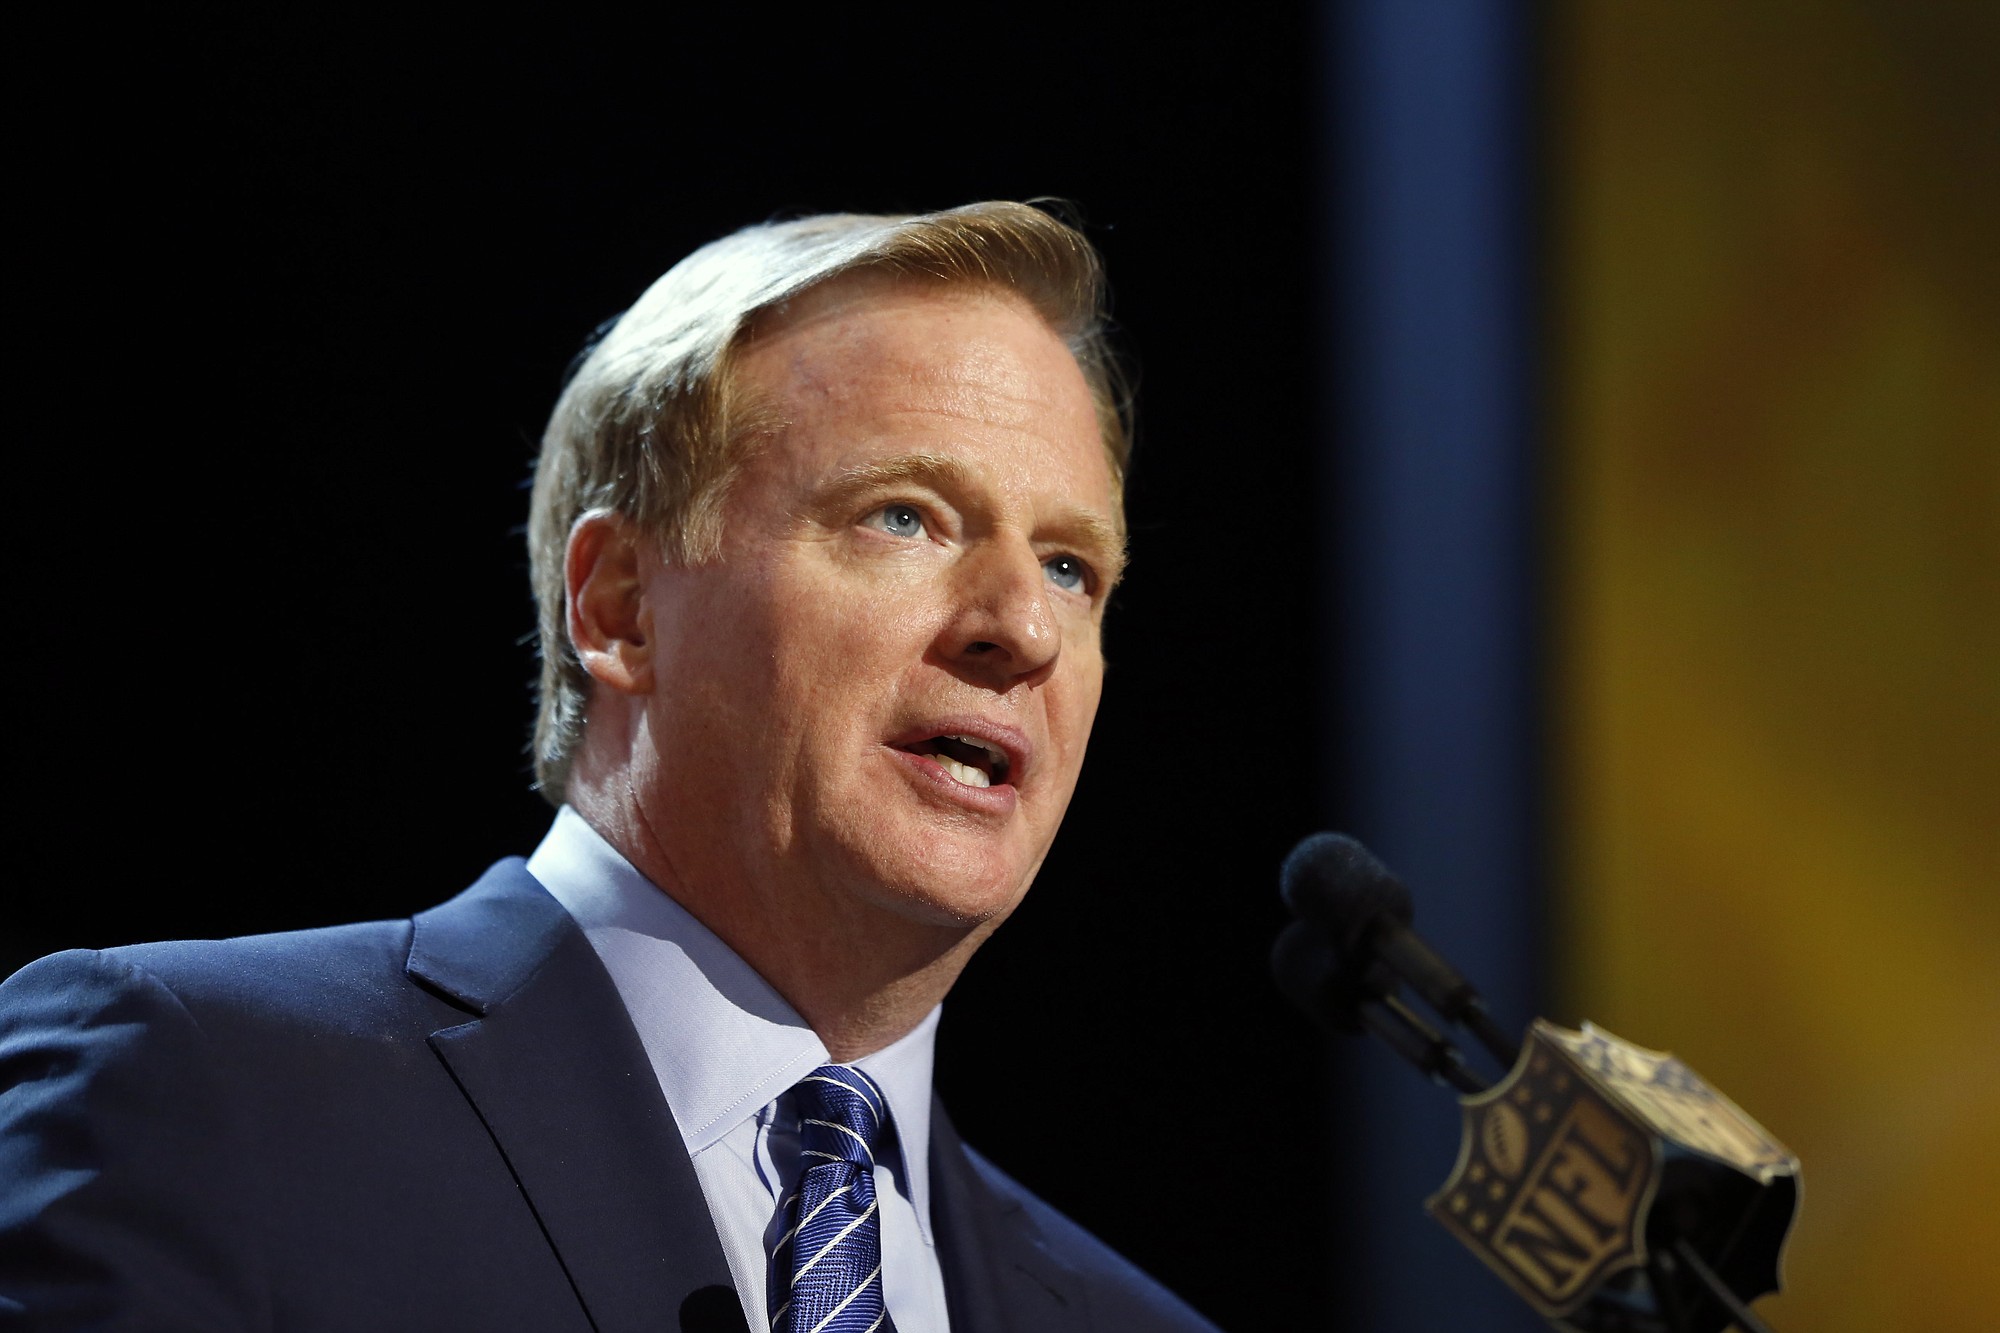 NFL Commissioner Roger Goodell speaks April 30 during the first round of the 2015 NFL Football Draft in Chicago.